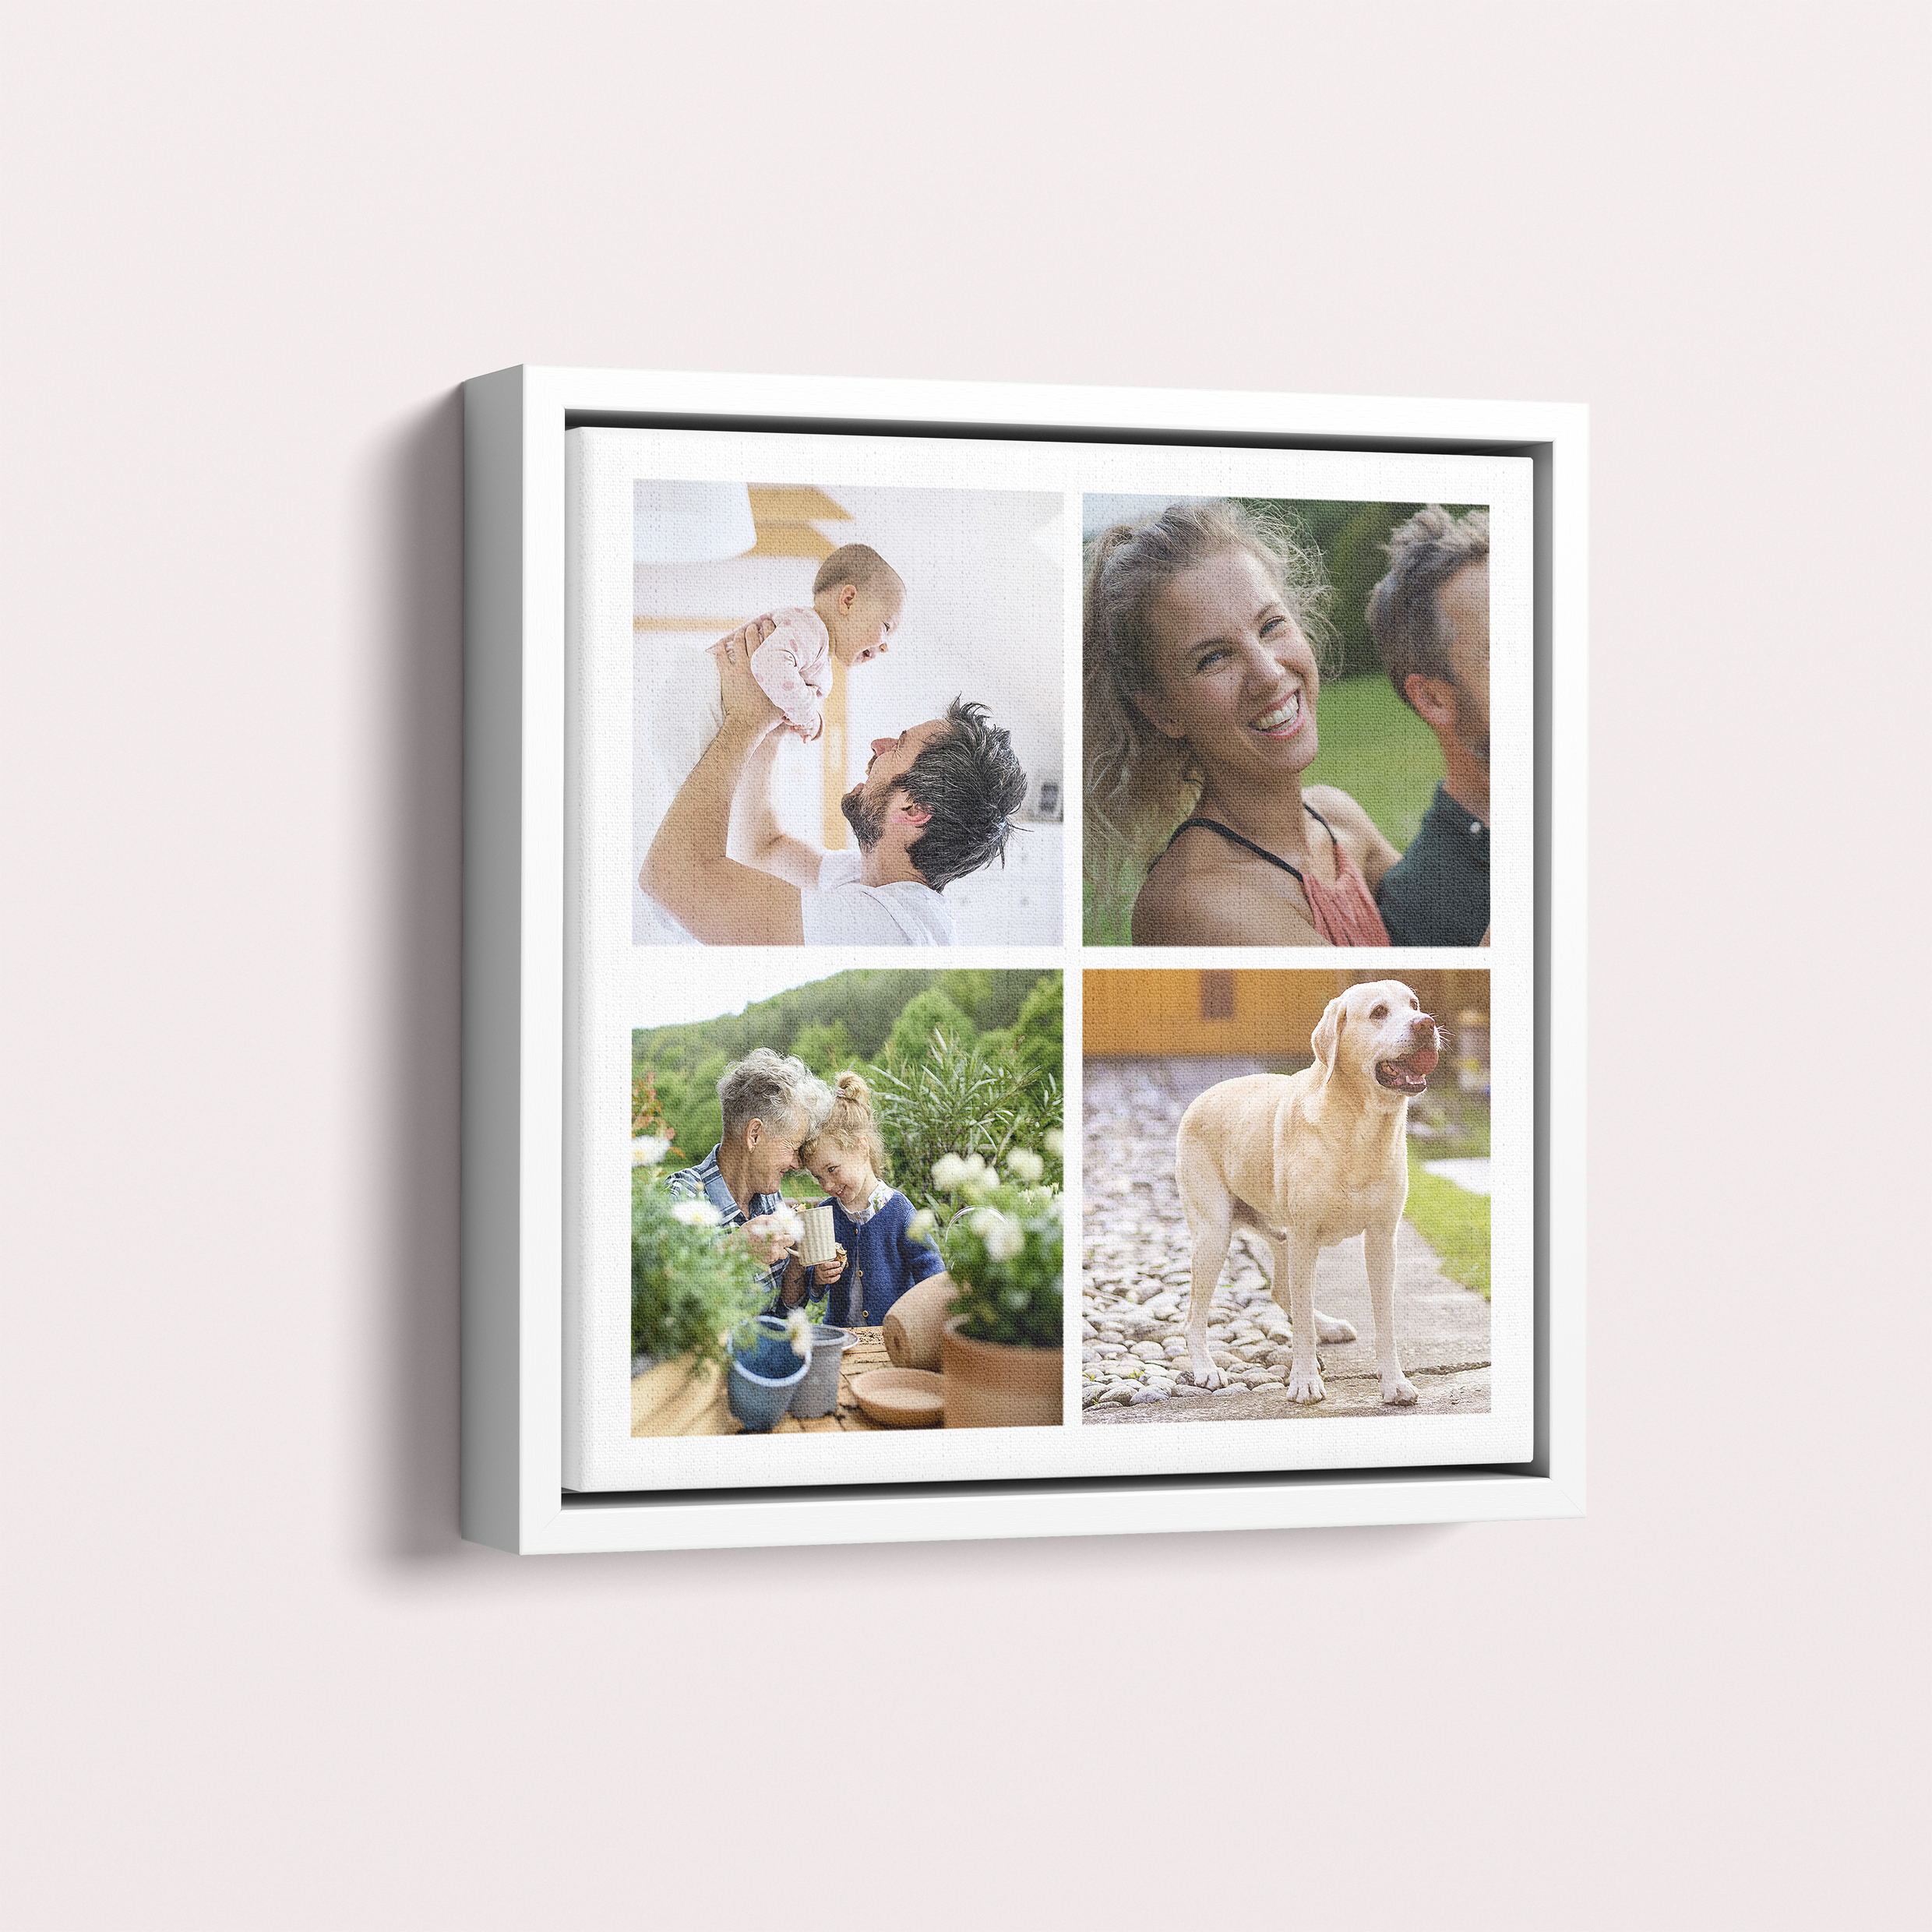 Friends Collage Framed Photo Canvas - Create your personal masterpiece with this customisable and handmade portrait canvas featuring 6 photos, celebrating the bond of friendship.